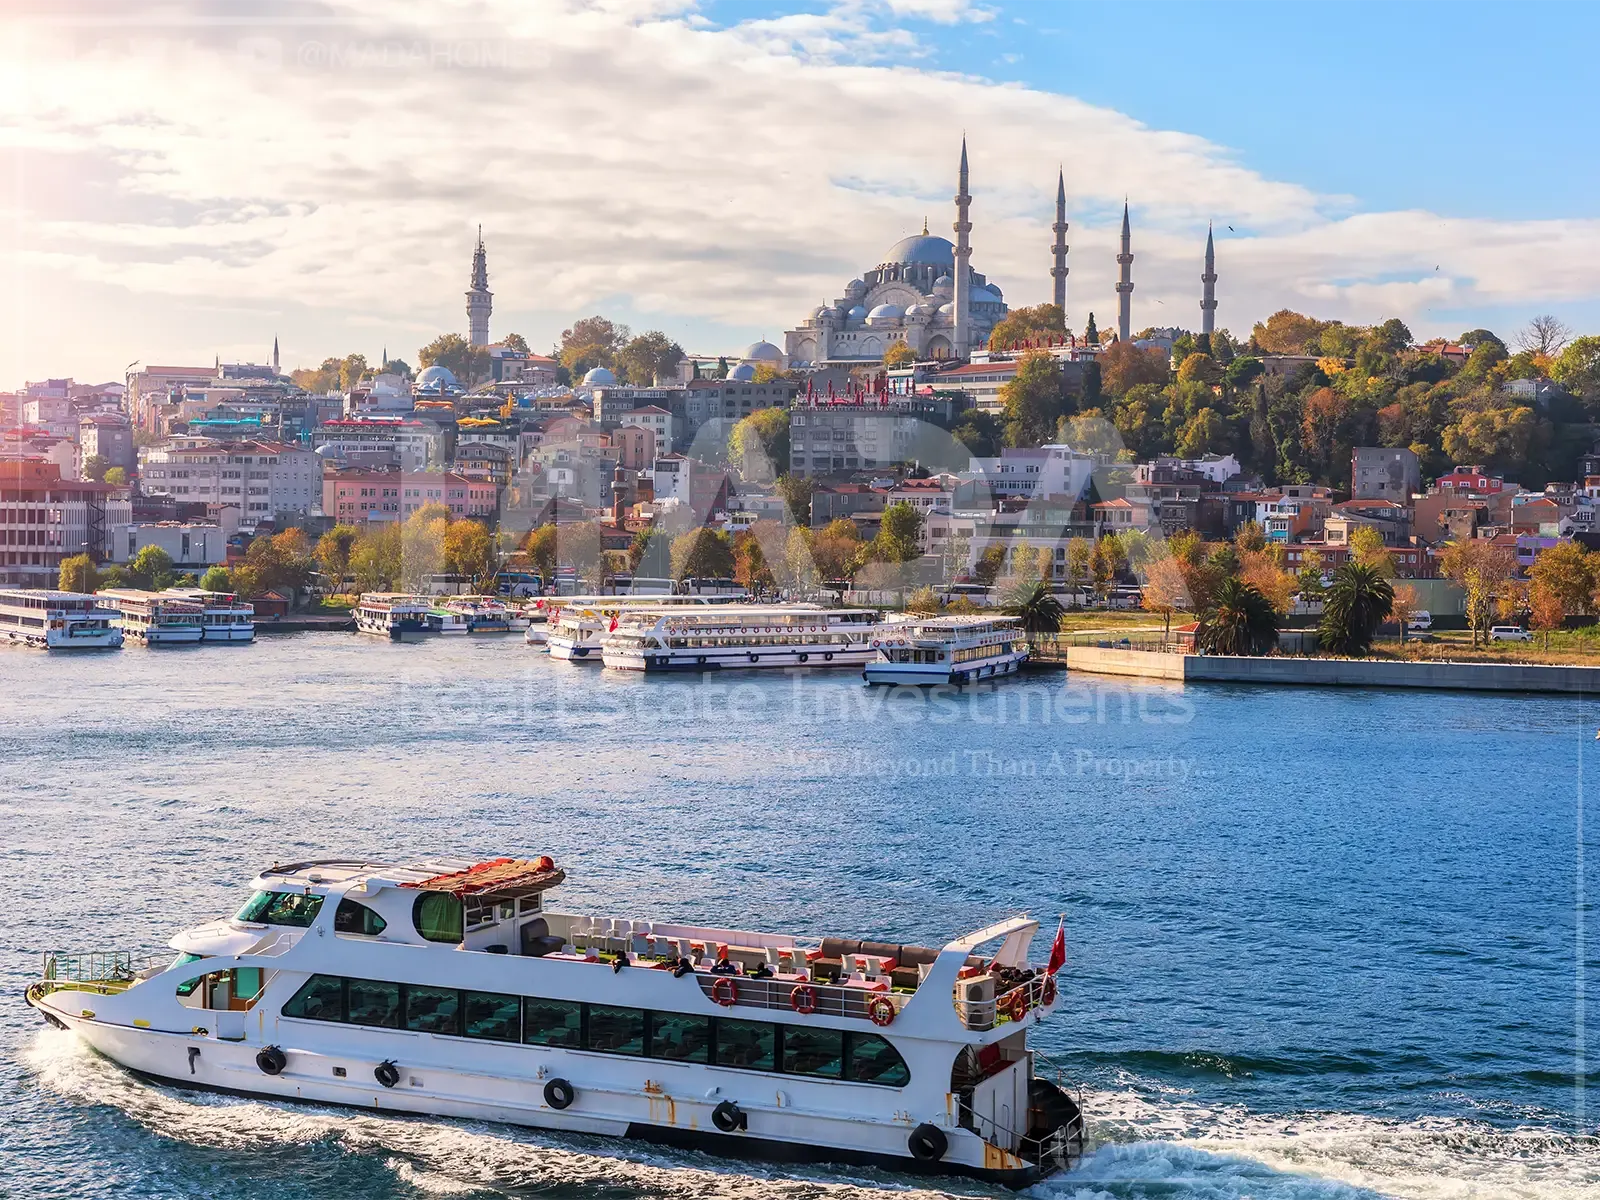 The best areas of Istanbul to buy an apartment